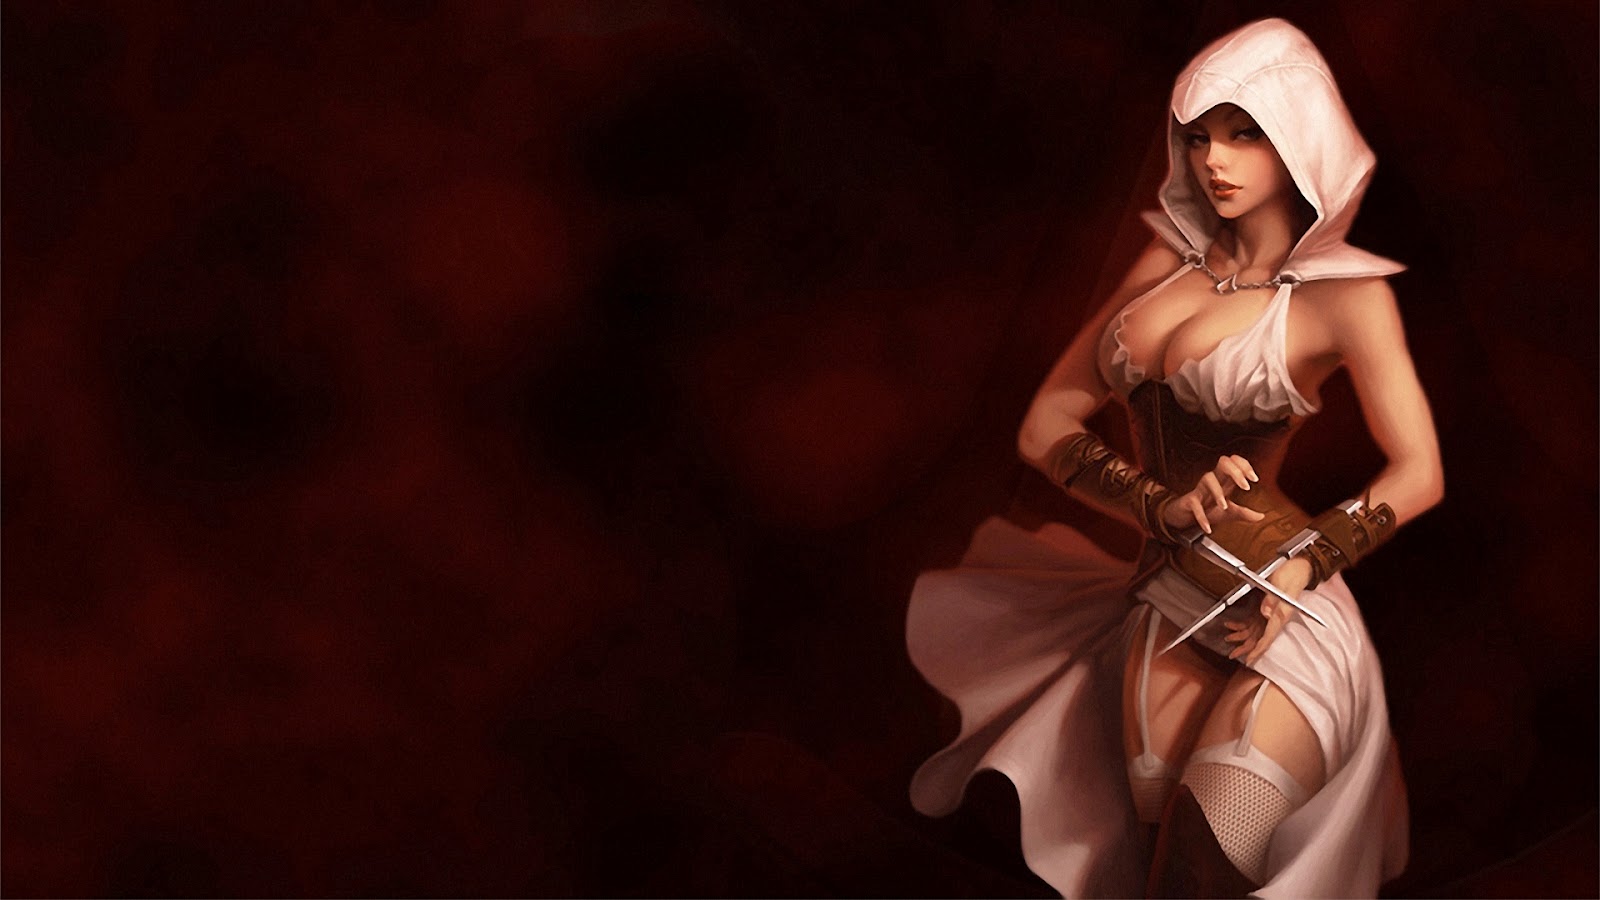 Sexy Assassin Girl Female S Creed Wallpaper